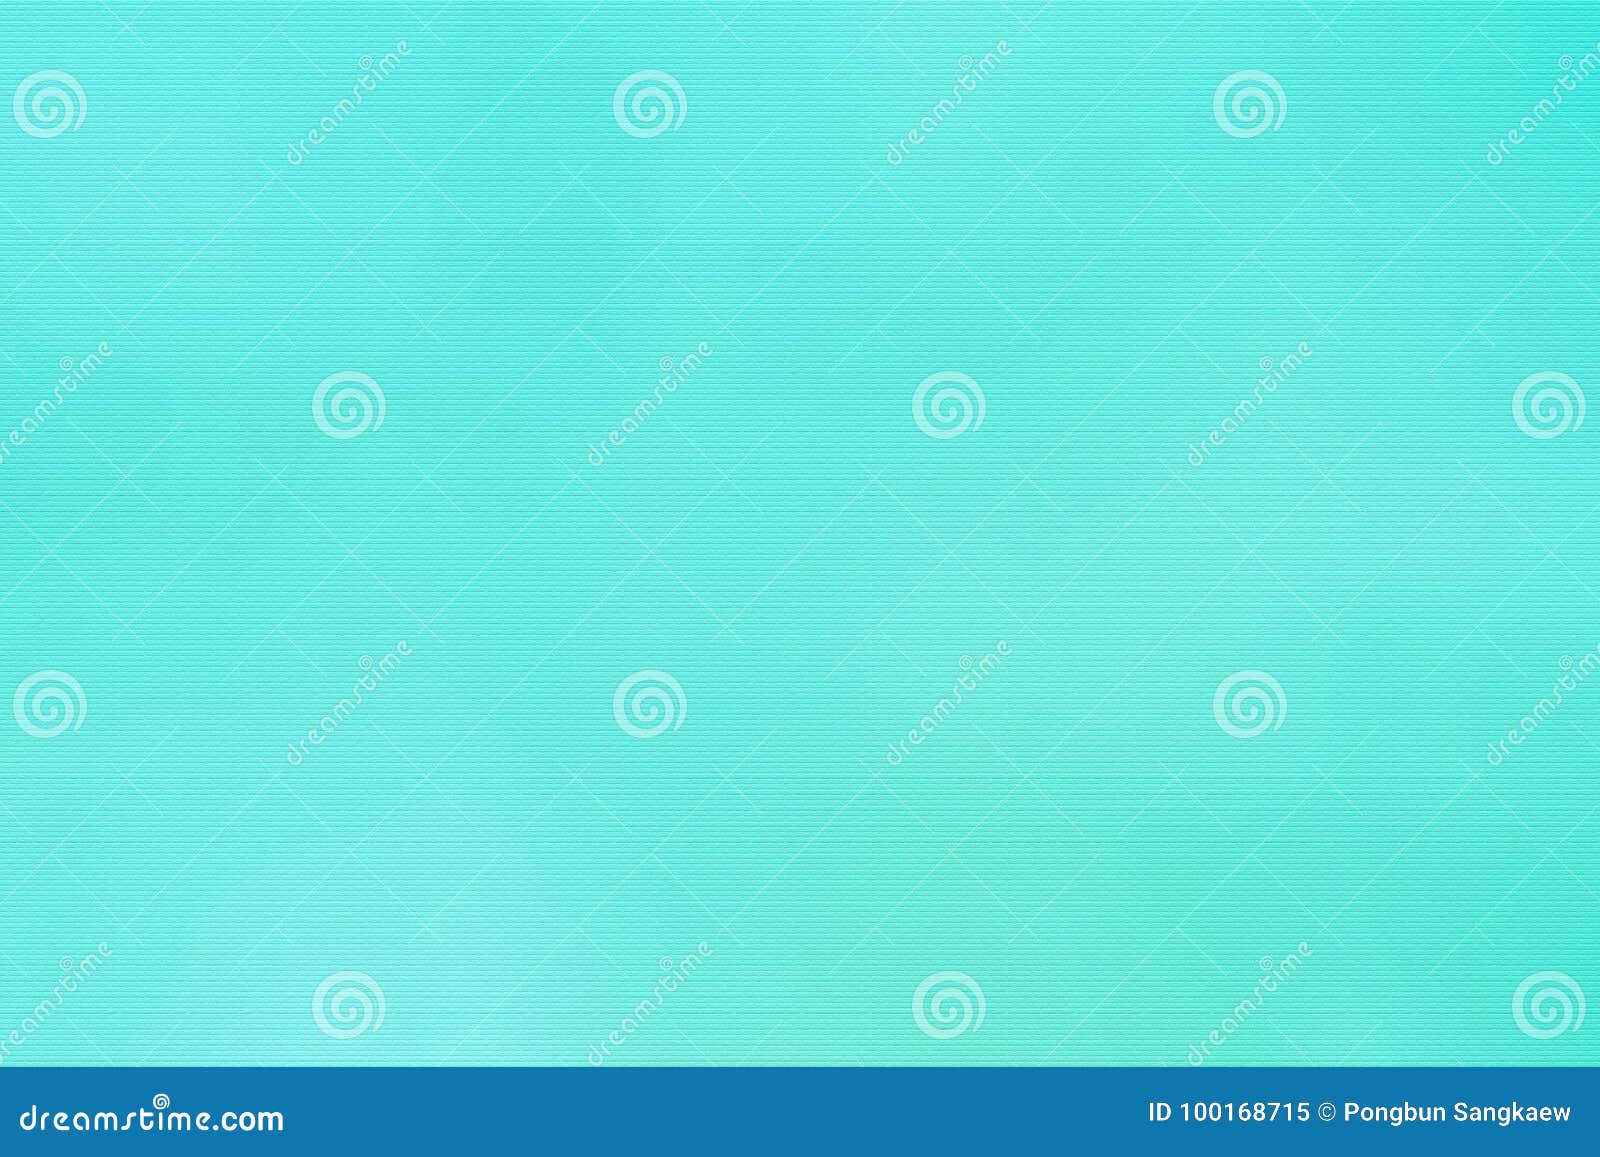 smooth blue turqouise simple background